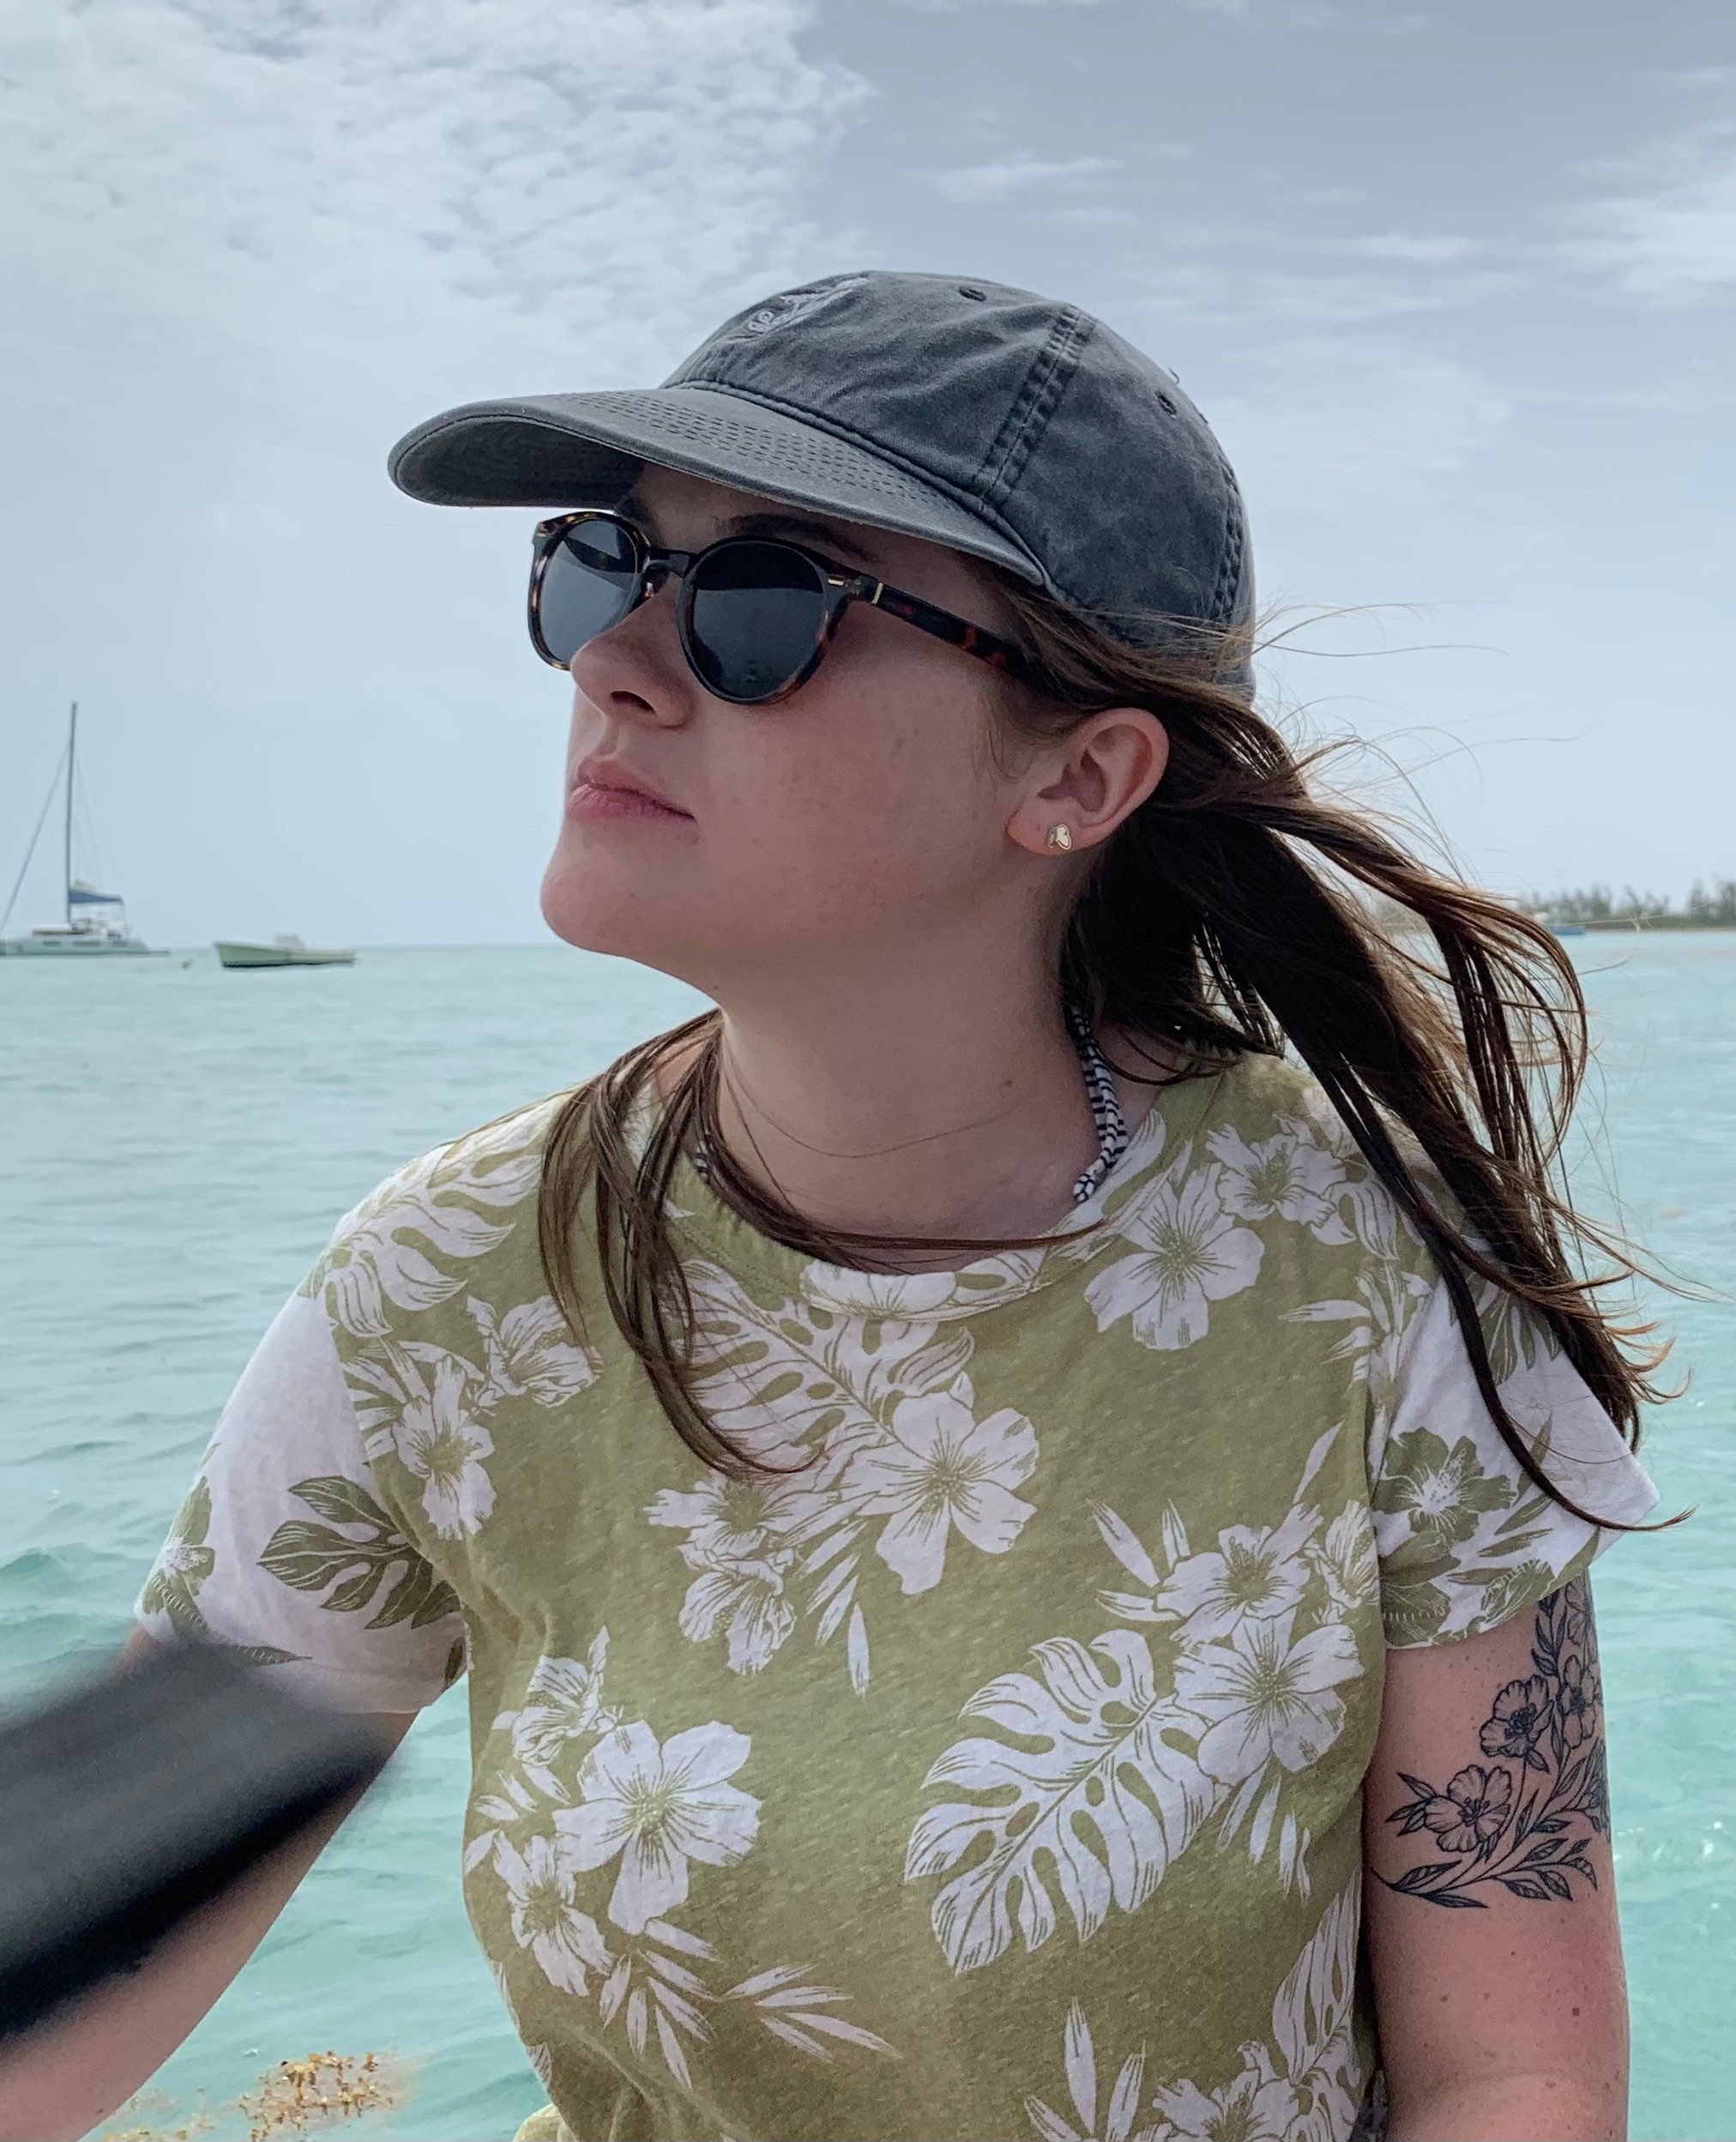 Elliana wears a cap and sunglasses and looks wistfully away while standing on a boat in the backdrop of the ocean.